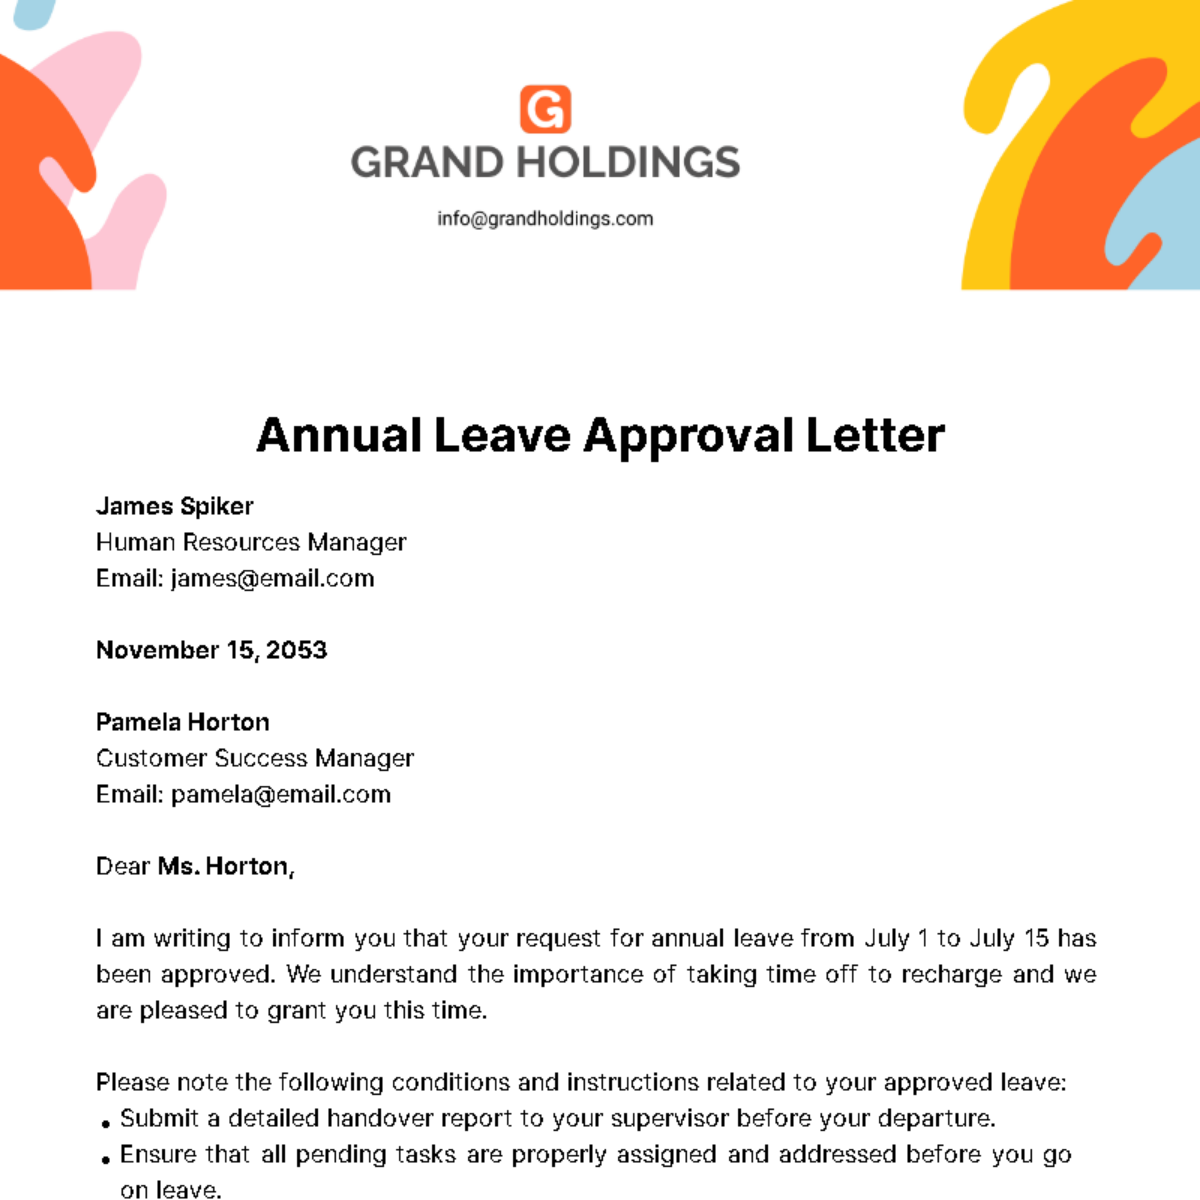 Annual Leave Approval Letter  Template